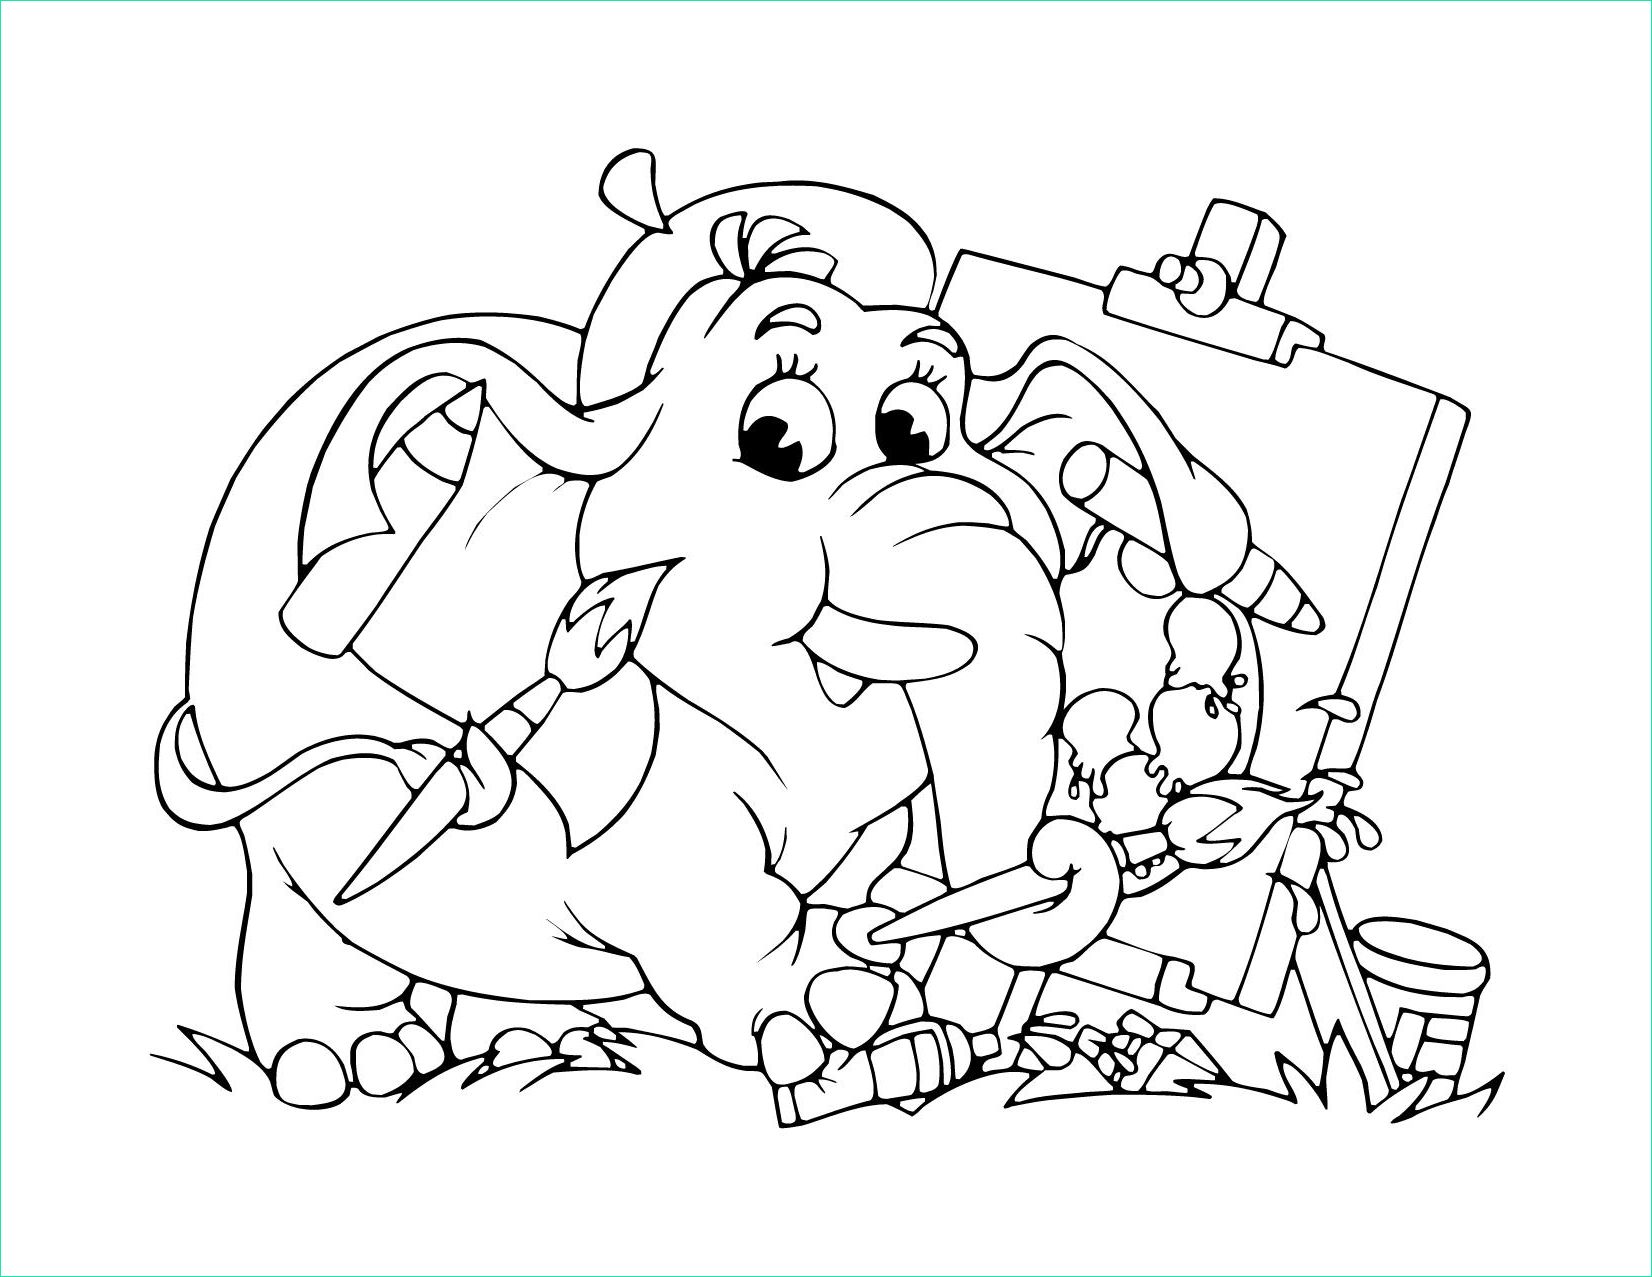 Coloriage Elephant Cool Images Coloriage A Imprimer Elephant Gratuit – Gratuit Coloriage